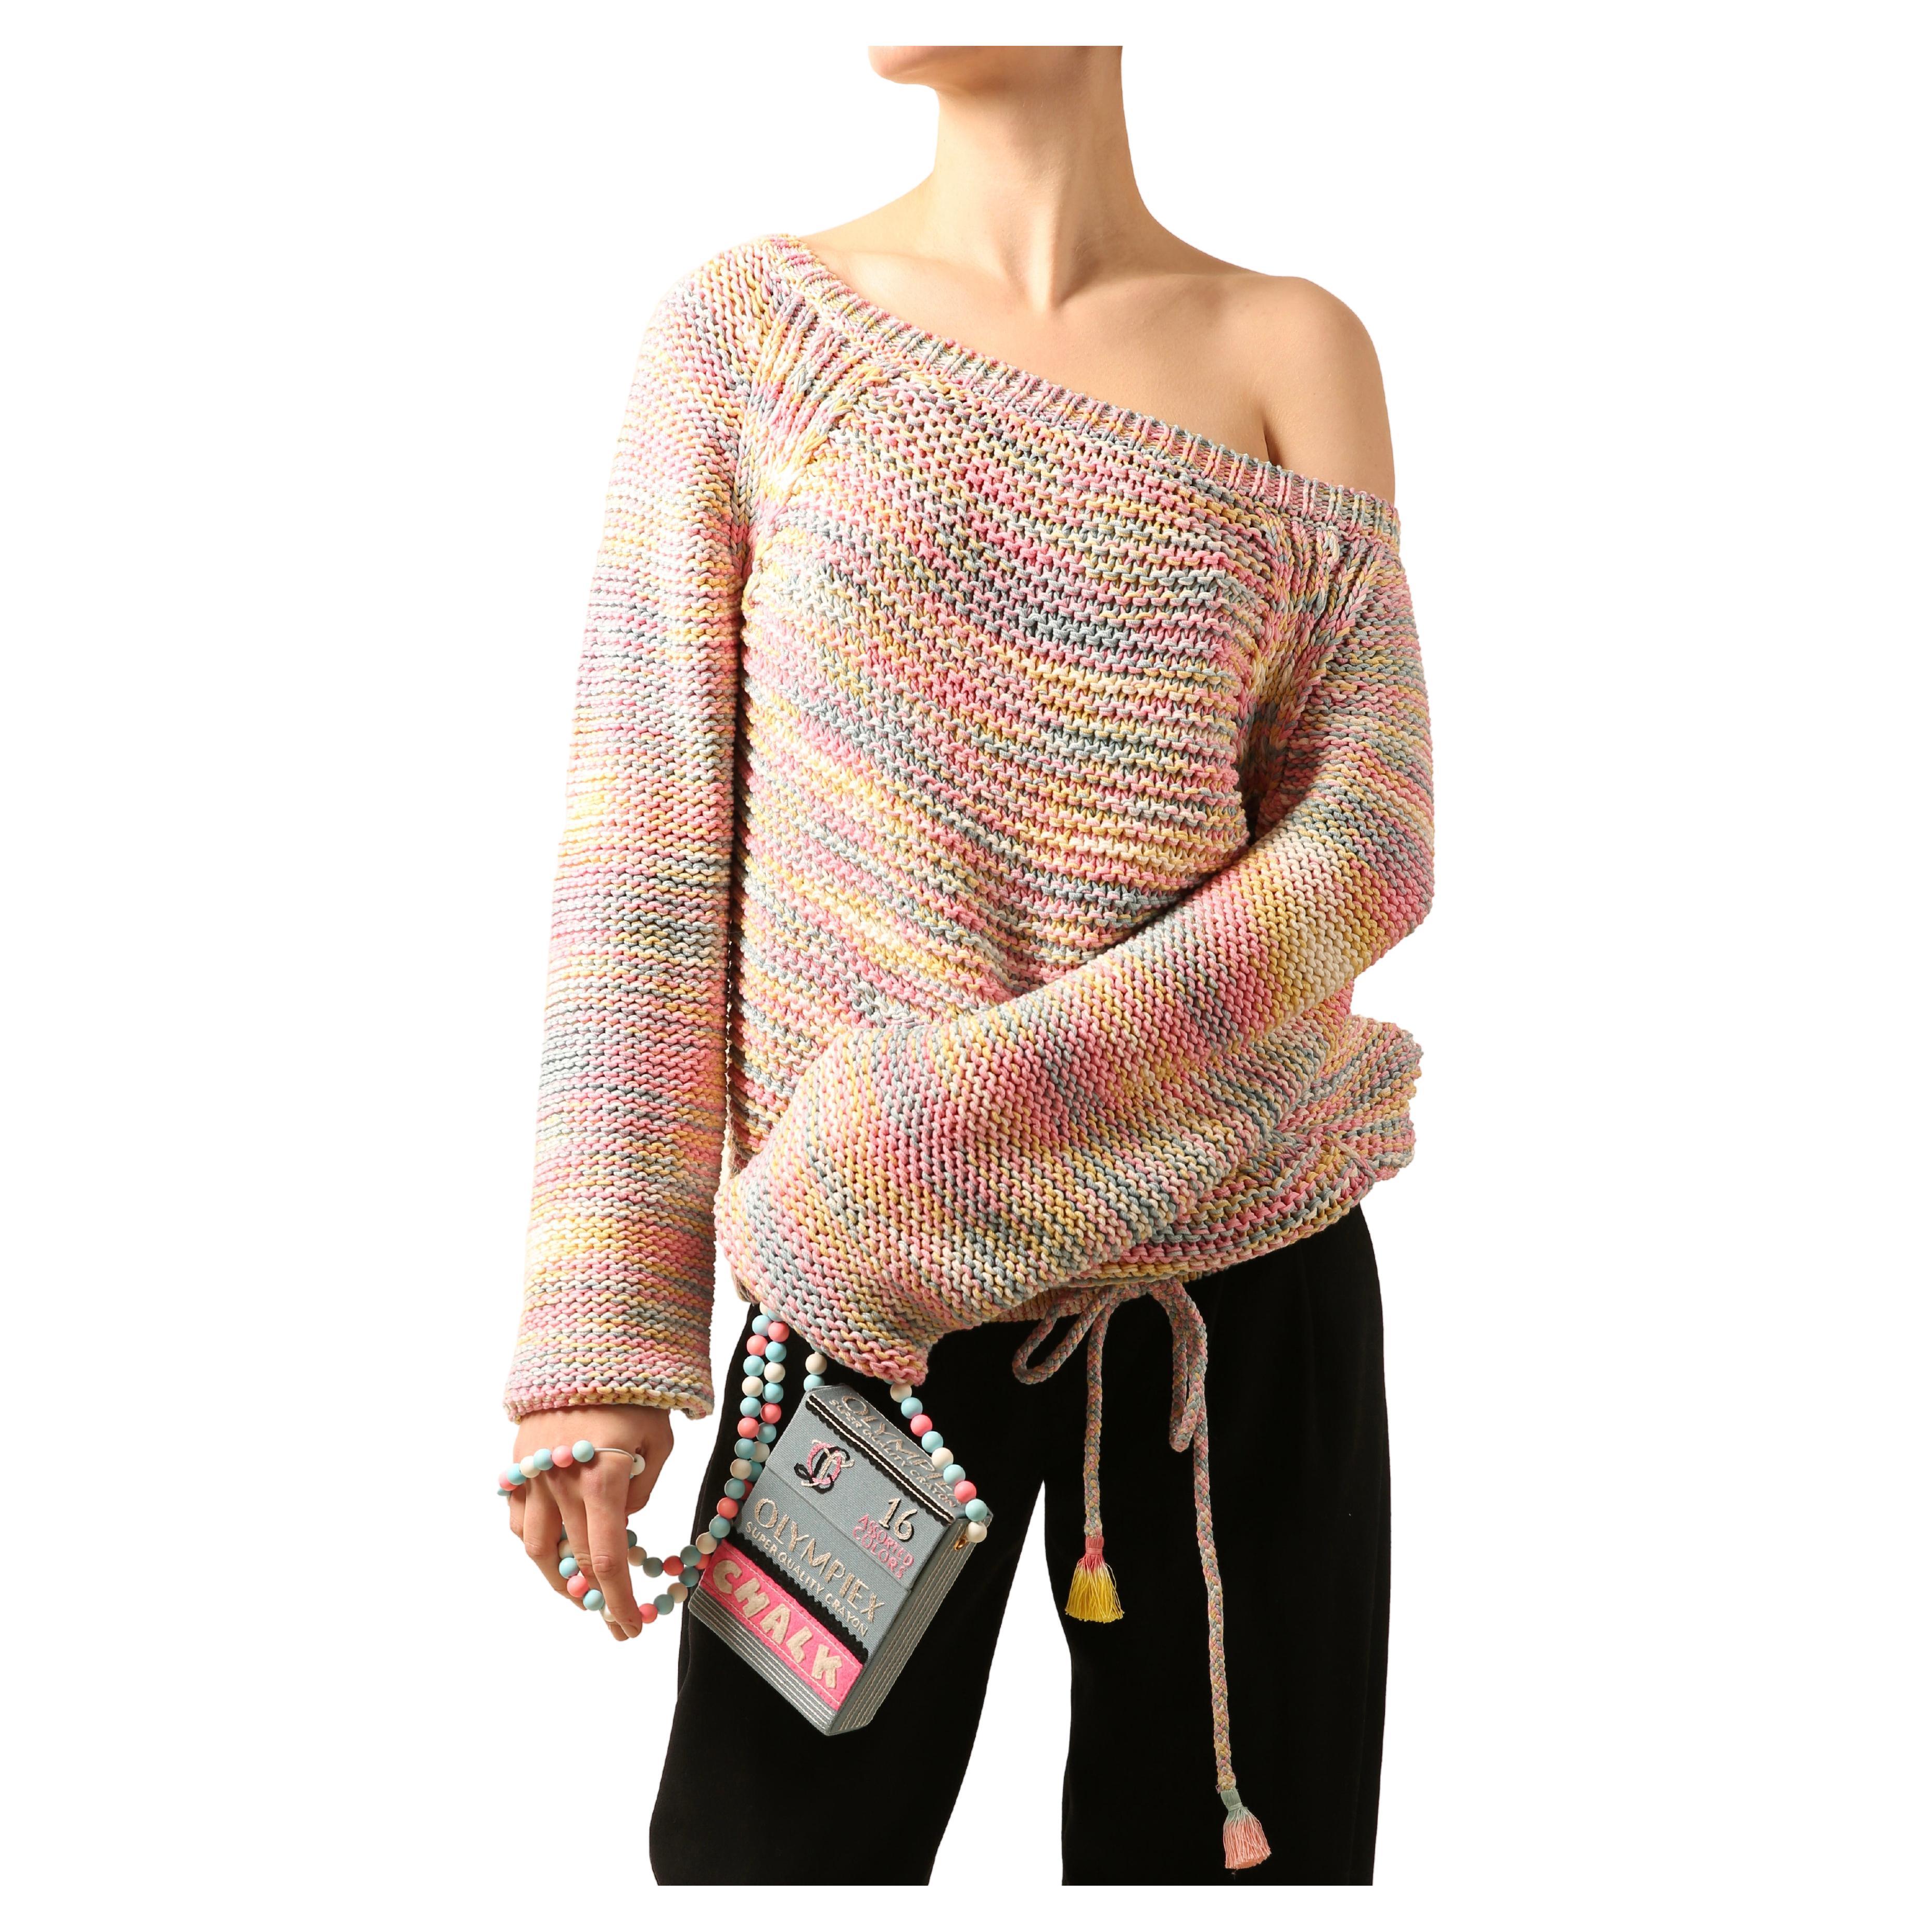 Chloe S/S 2016 oversized chunky knit knitted pink pastel rainbow slouch sweater For Sale